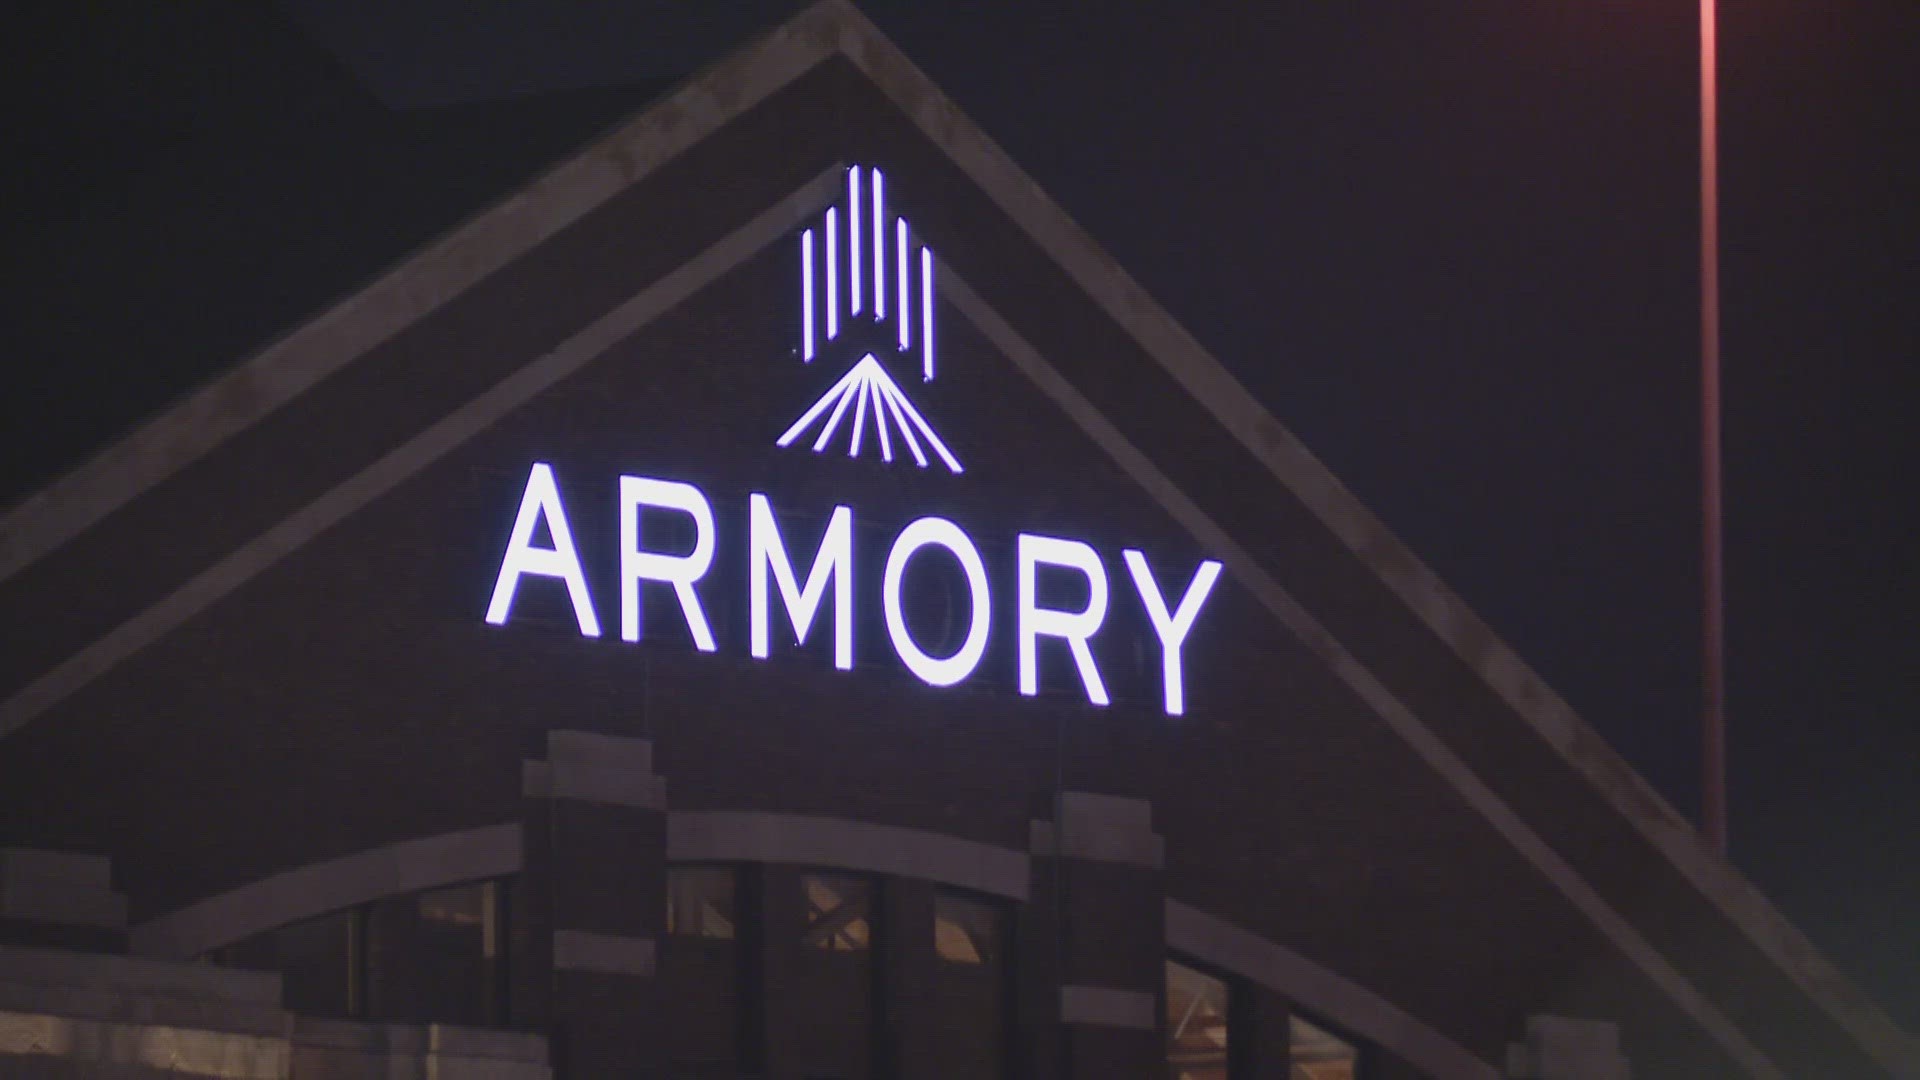 After a series of break-ins, The Armory is increasing its security.